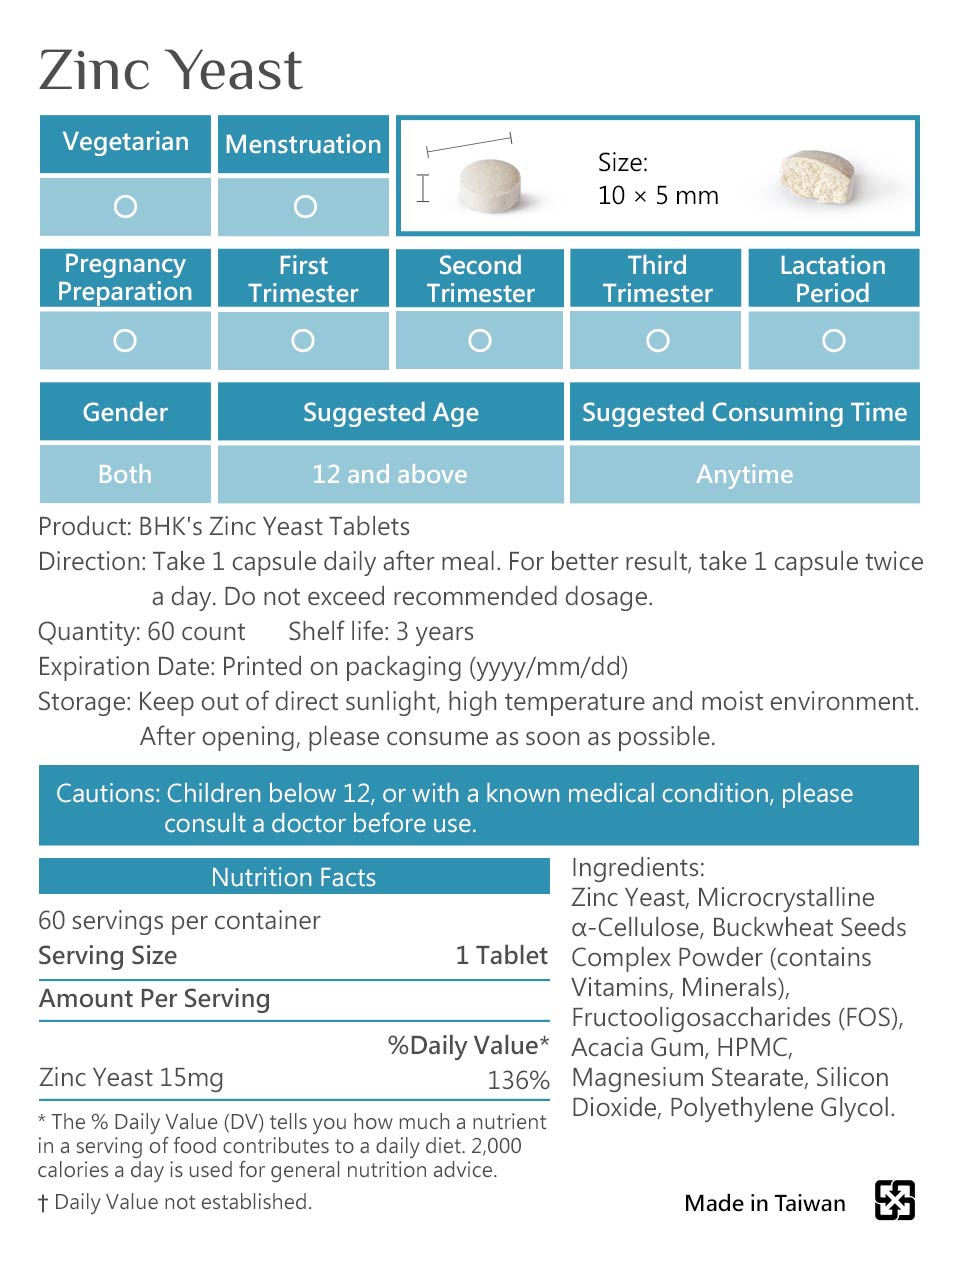 BHK's Zinc Yeast review is good and effective, with guaranteed quality and safe ingredients.